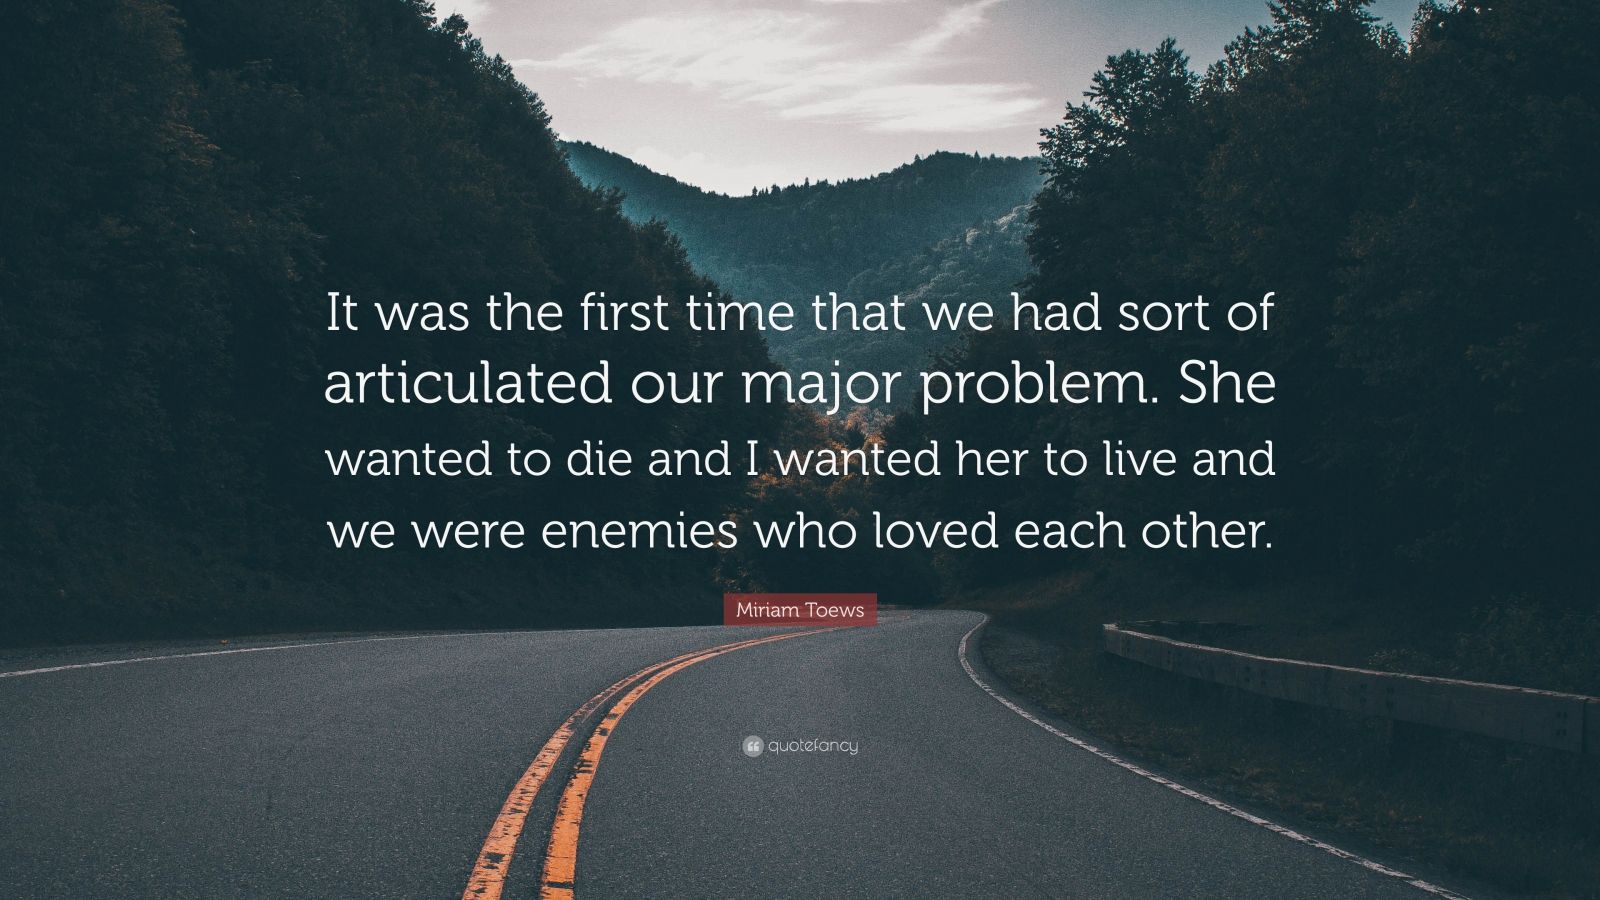 Miriam Toews Quote: “It was the first time that we had sort of ...